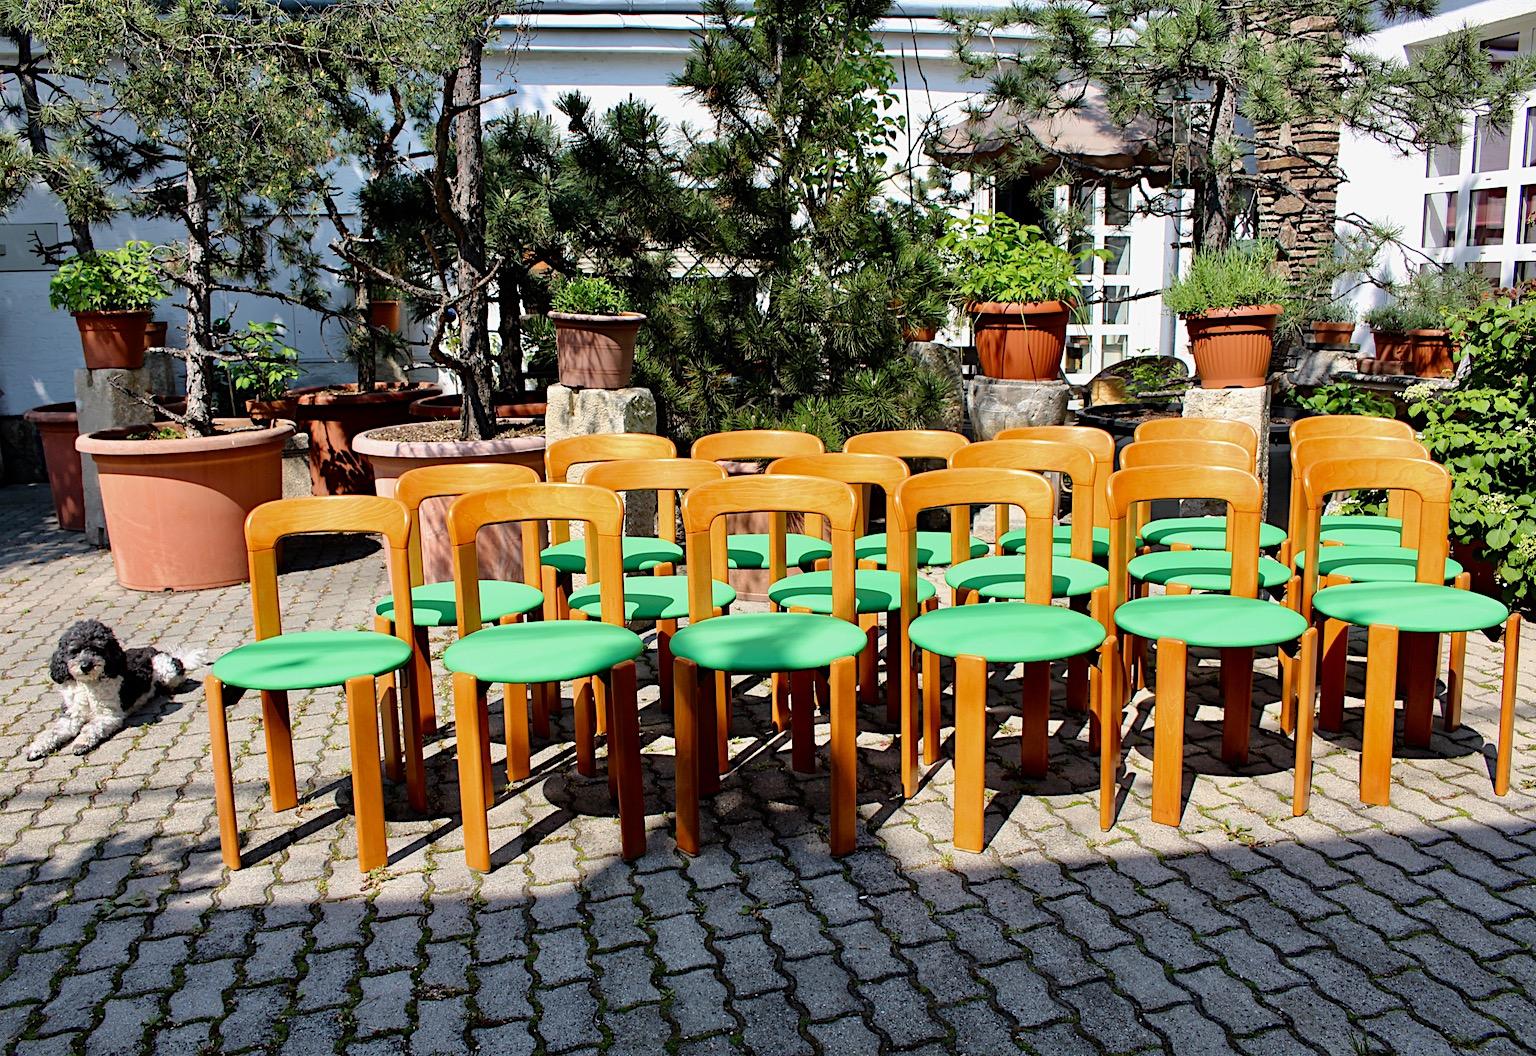 Bruno Rey vintage dining chairs from honey brown beech and upholstery covered with green textile fabric.
The wonderful 25 pieces of vintage dining chairs were designed by Bruno Rey 1970s Switzerland.
The stackable dining chairs were made of solid